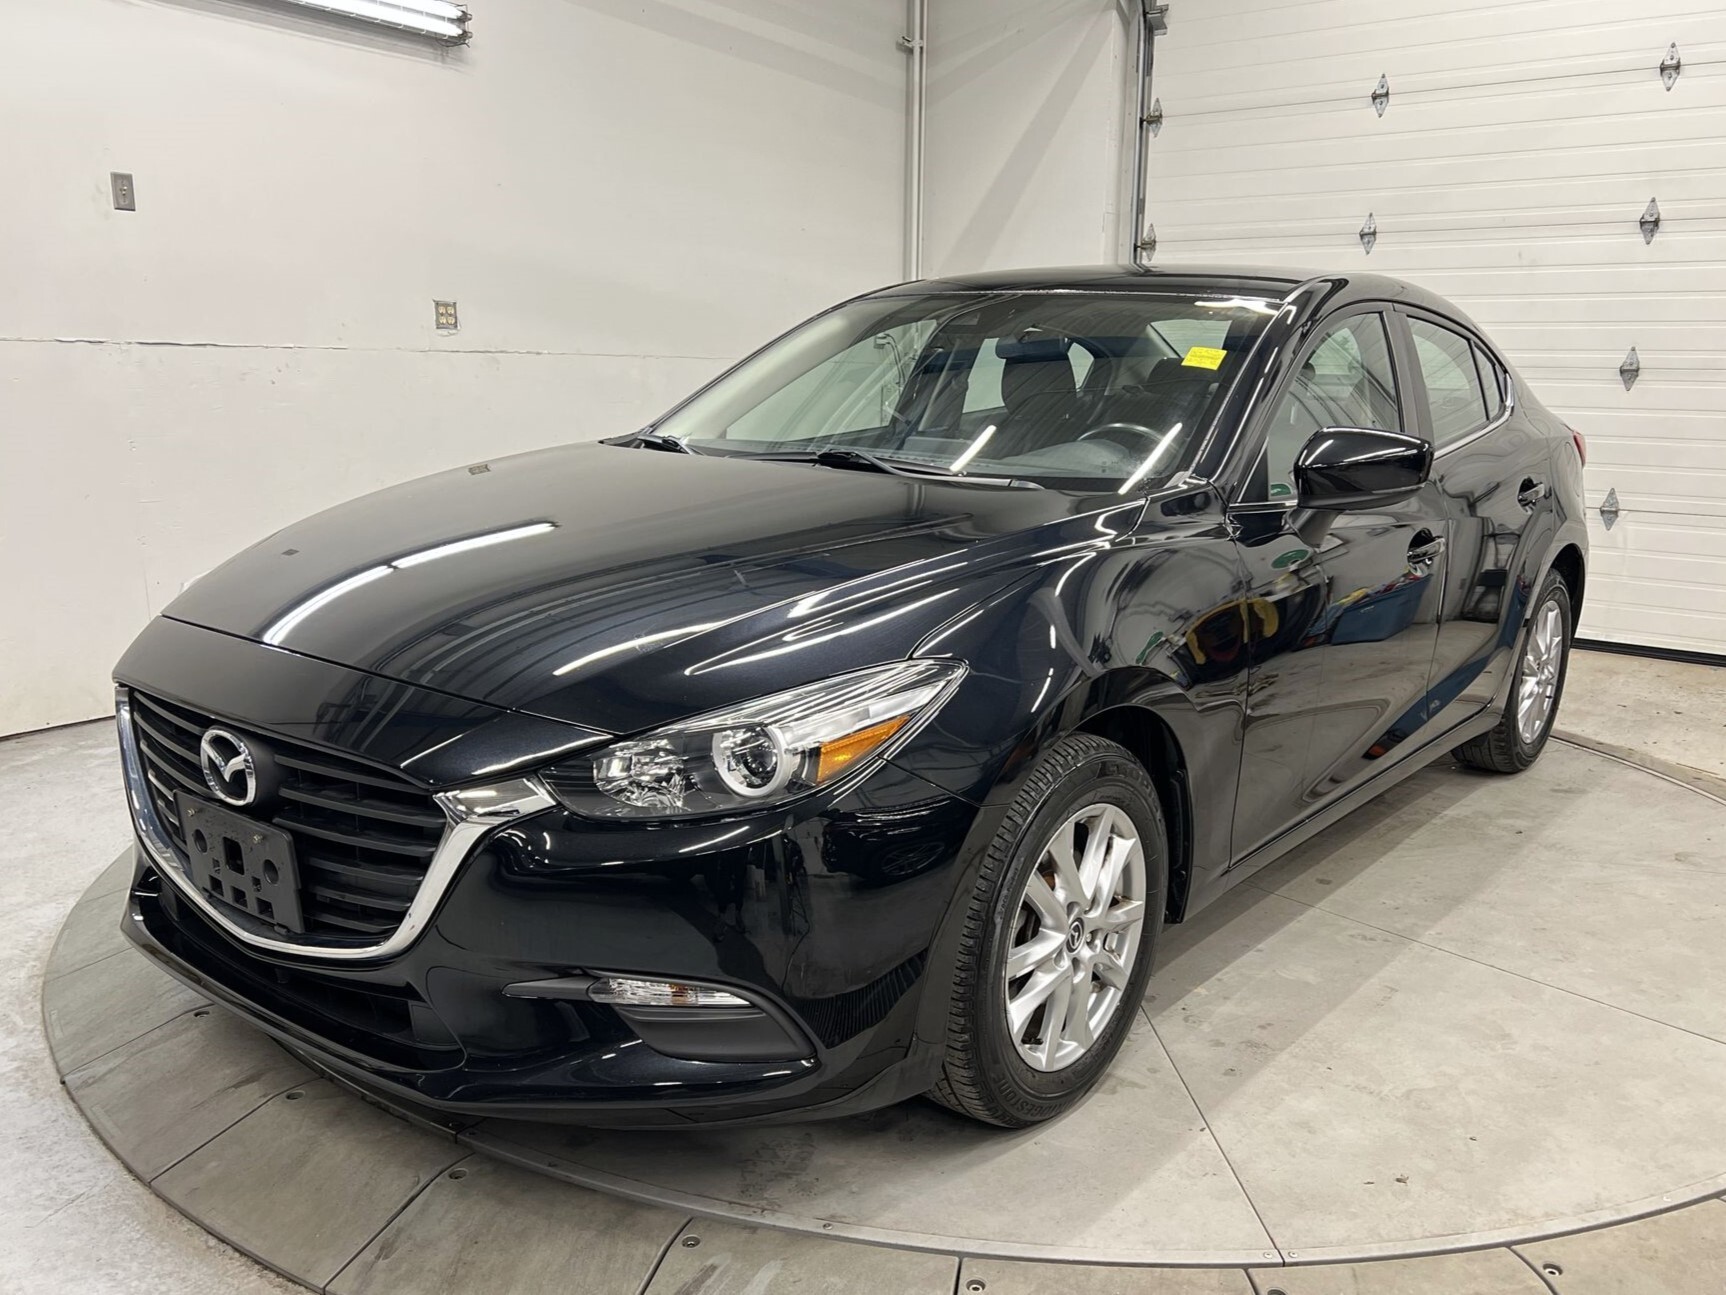 2018 Mazda Mazda3 GS | 6-SPEED |ONLY 24K KMS! |HTD SEATS |BLIND SPOT